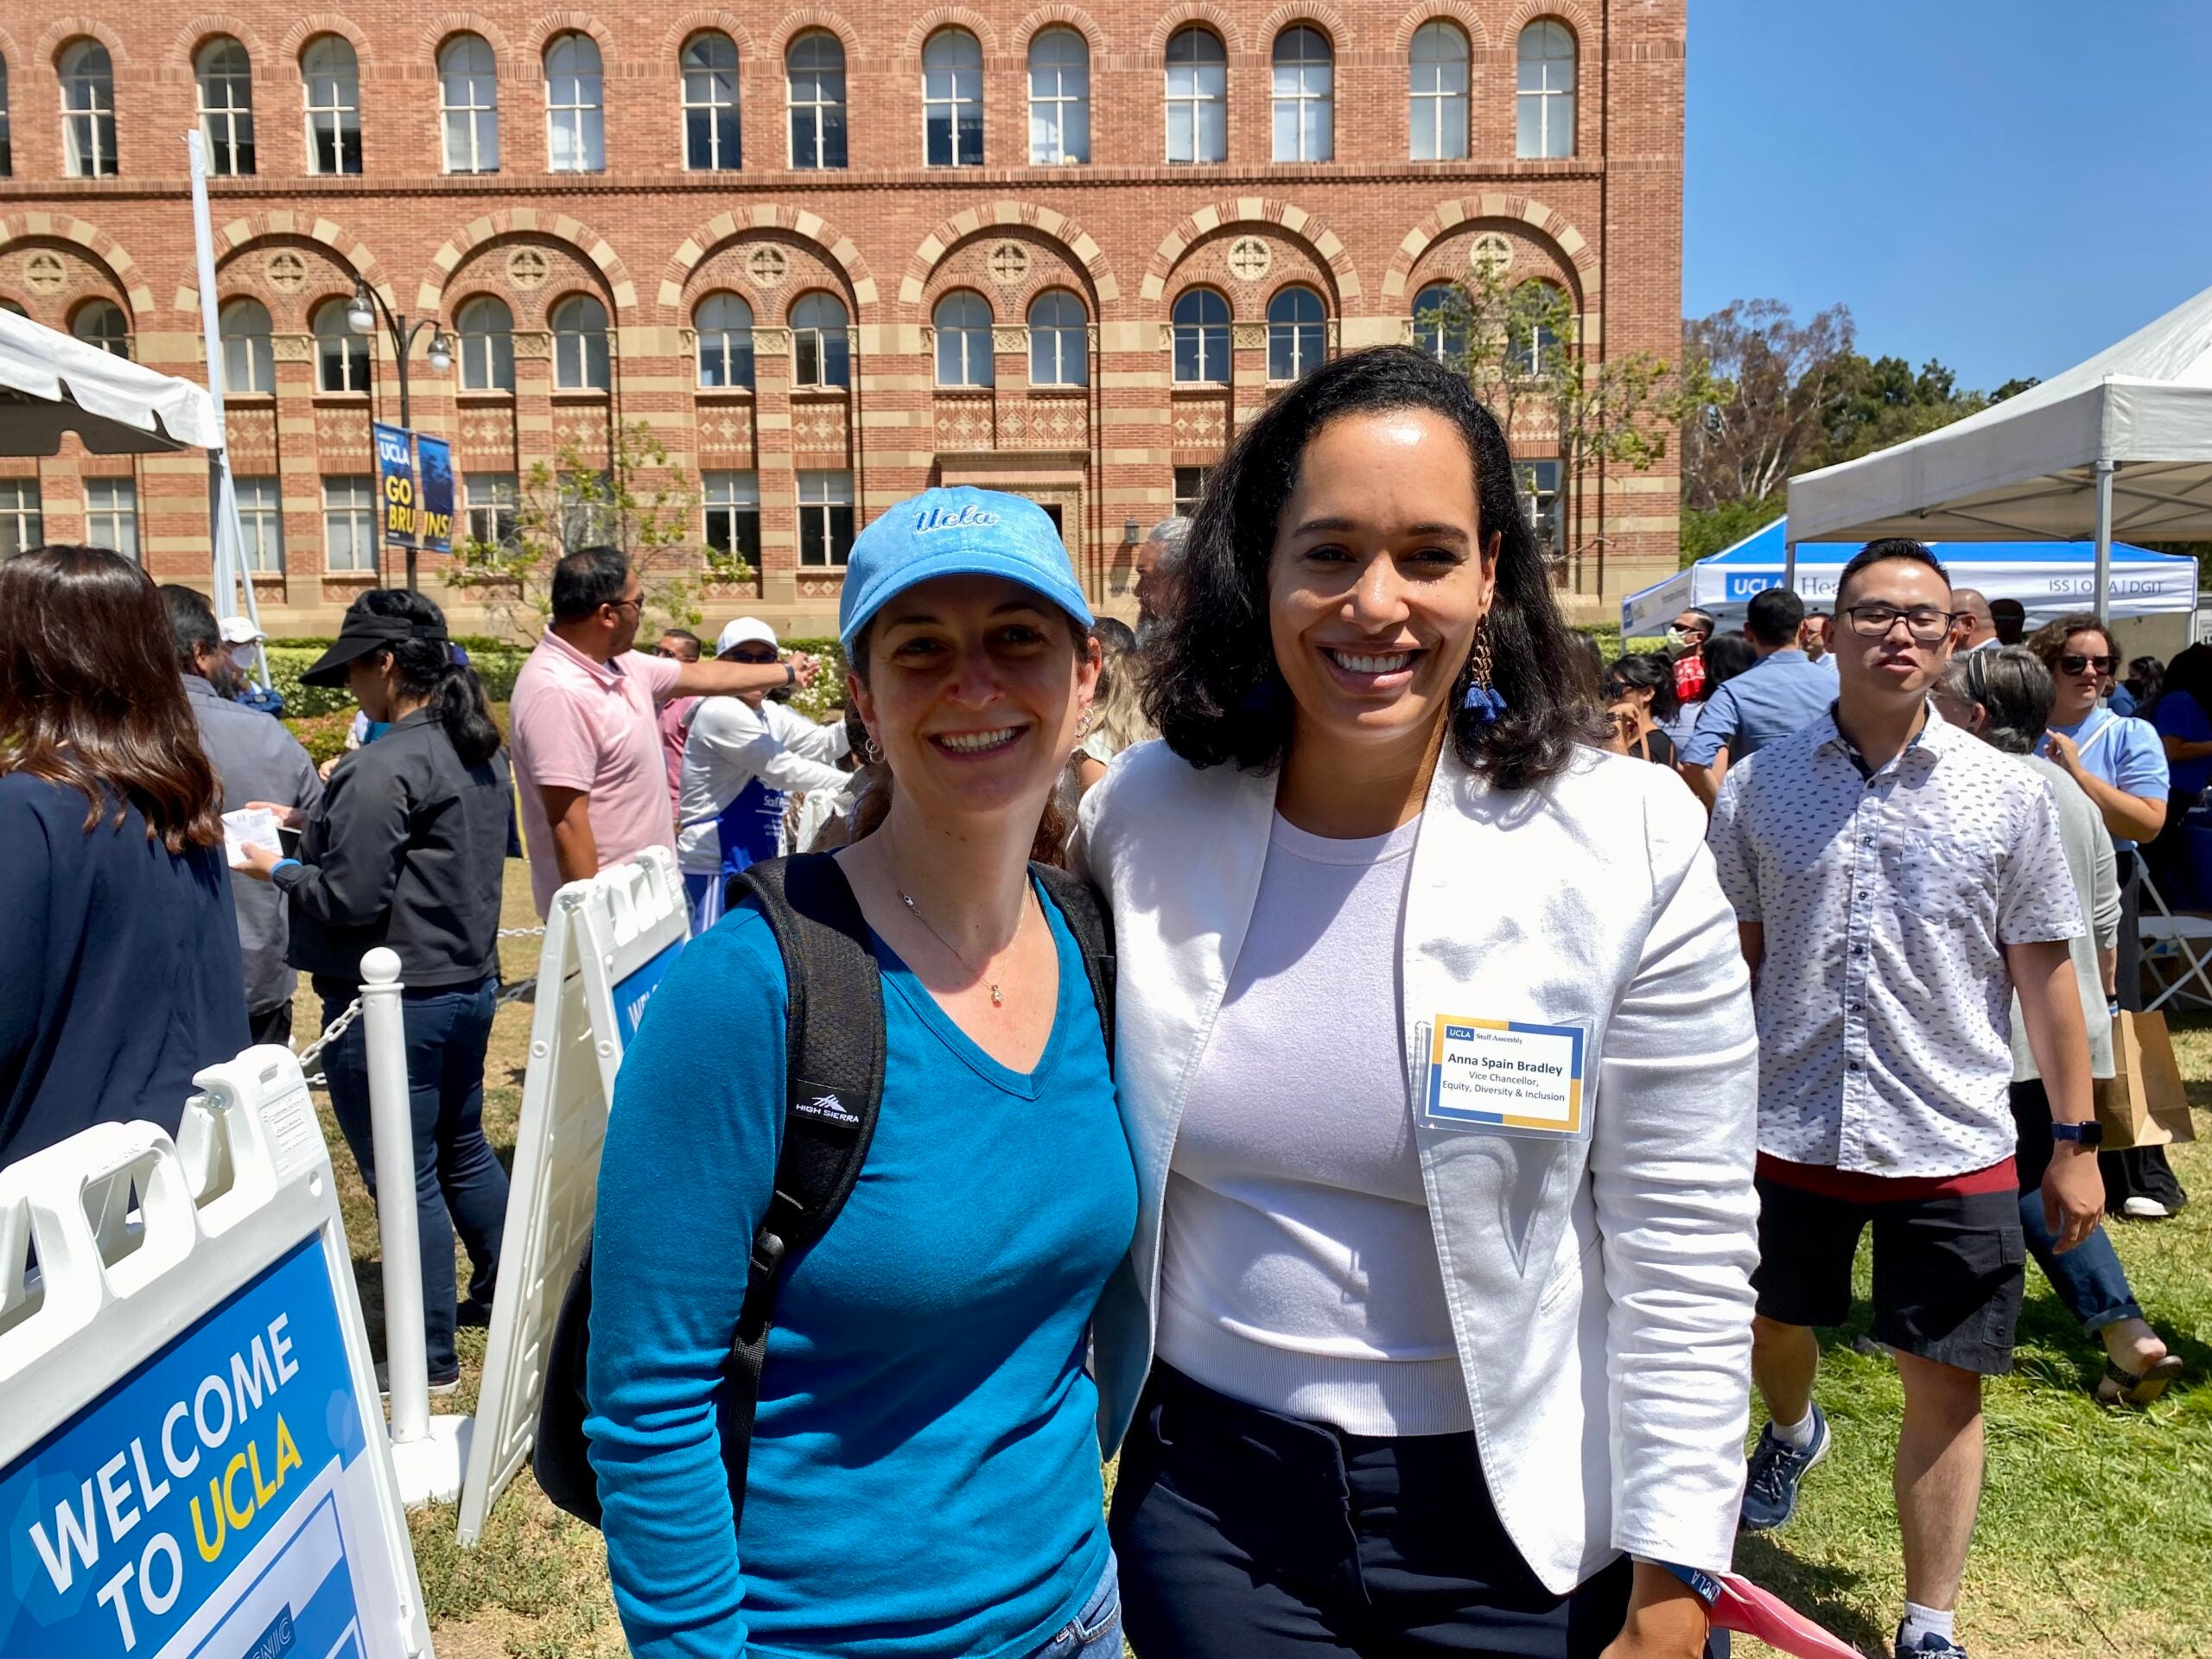 vice chancellor for edi anna spain bradley and title ix investigator rachel rappaport at the ucla 17th annual all-staff picnic (thursday, august 18, 2022)